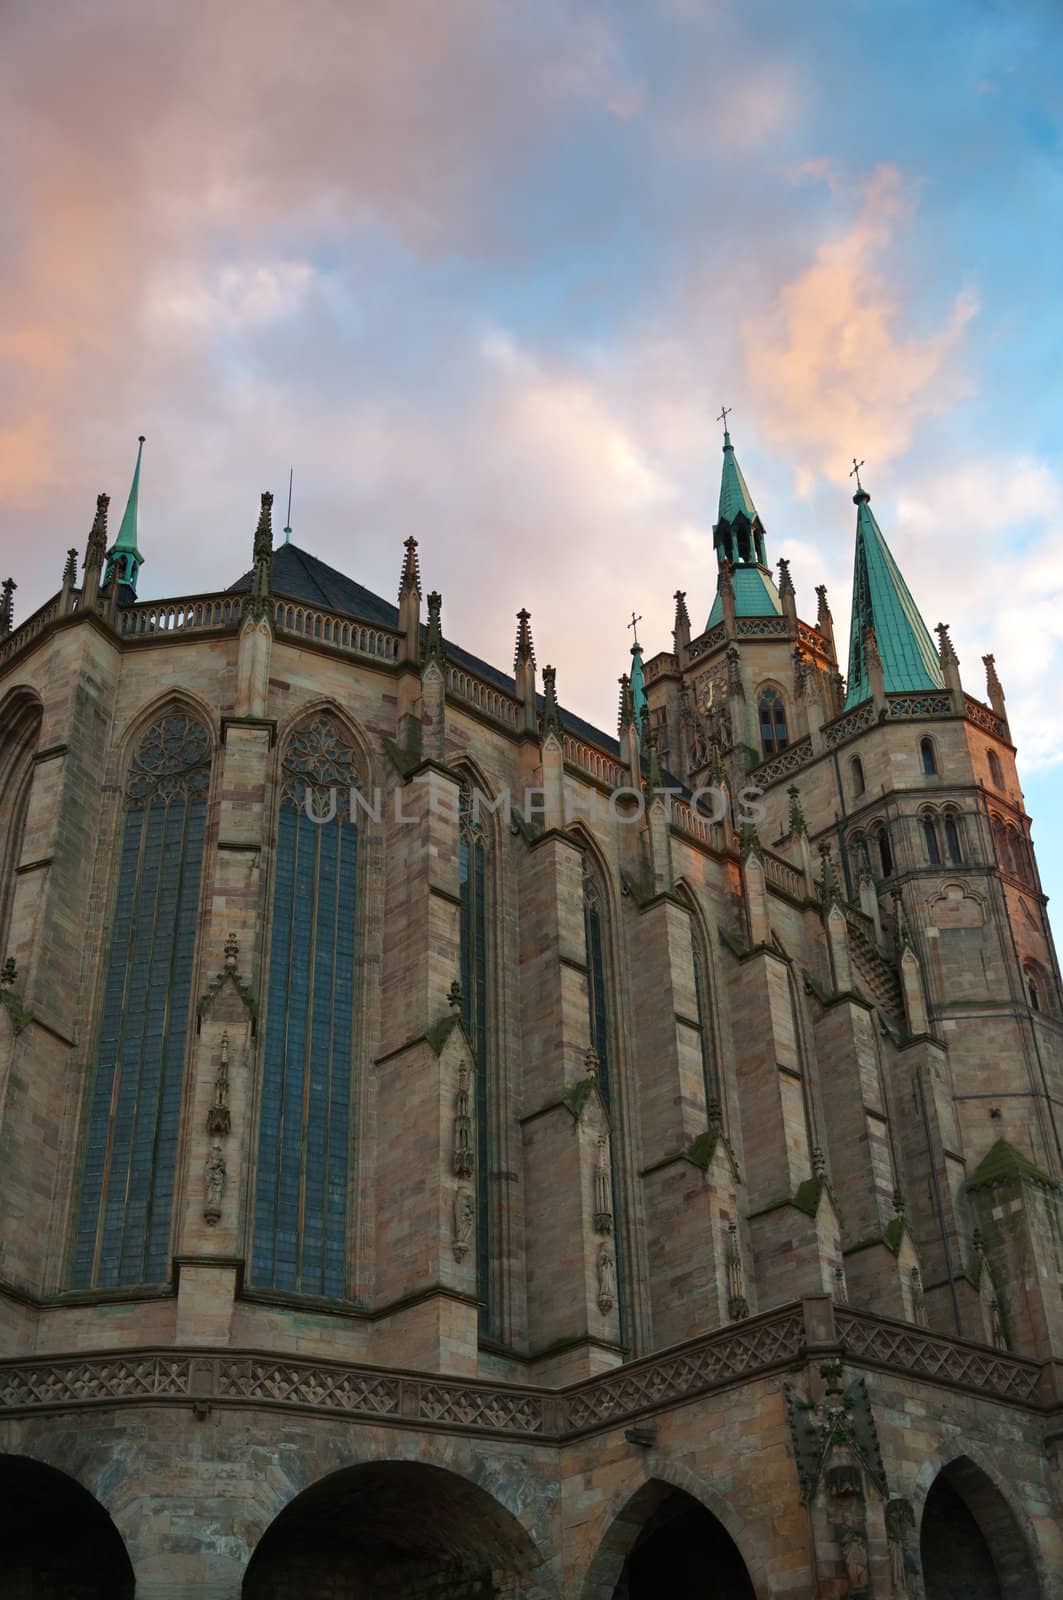 Building of Dome Cathedral in Erfurt, Germany.